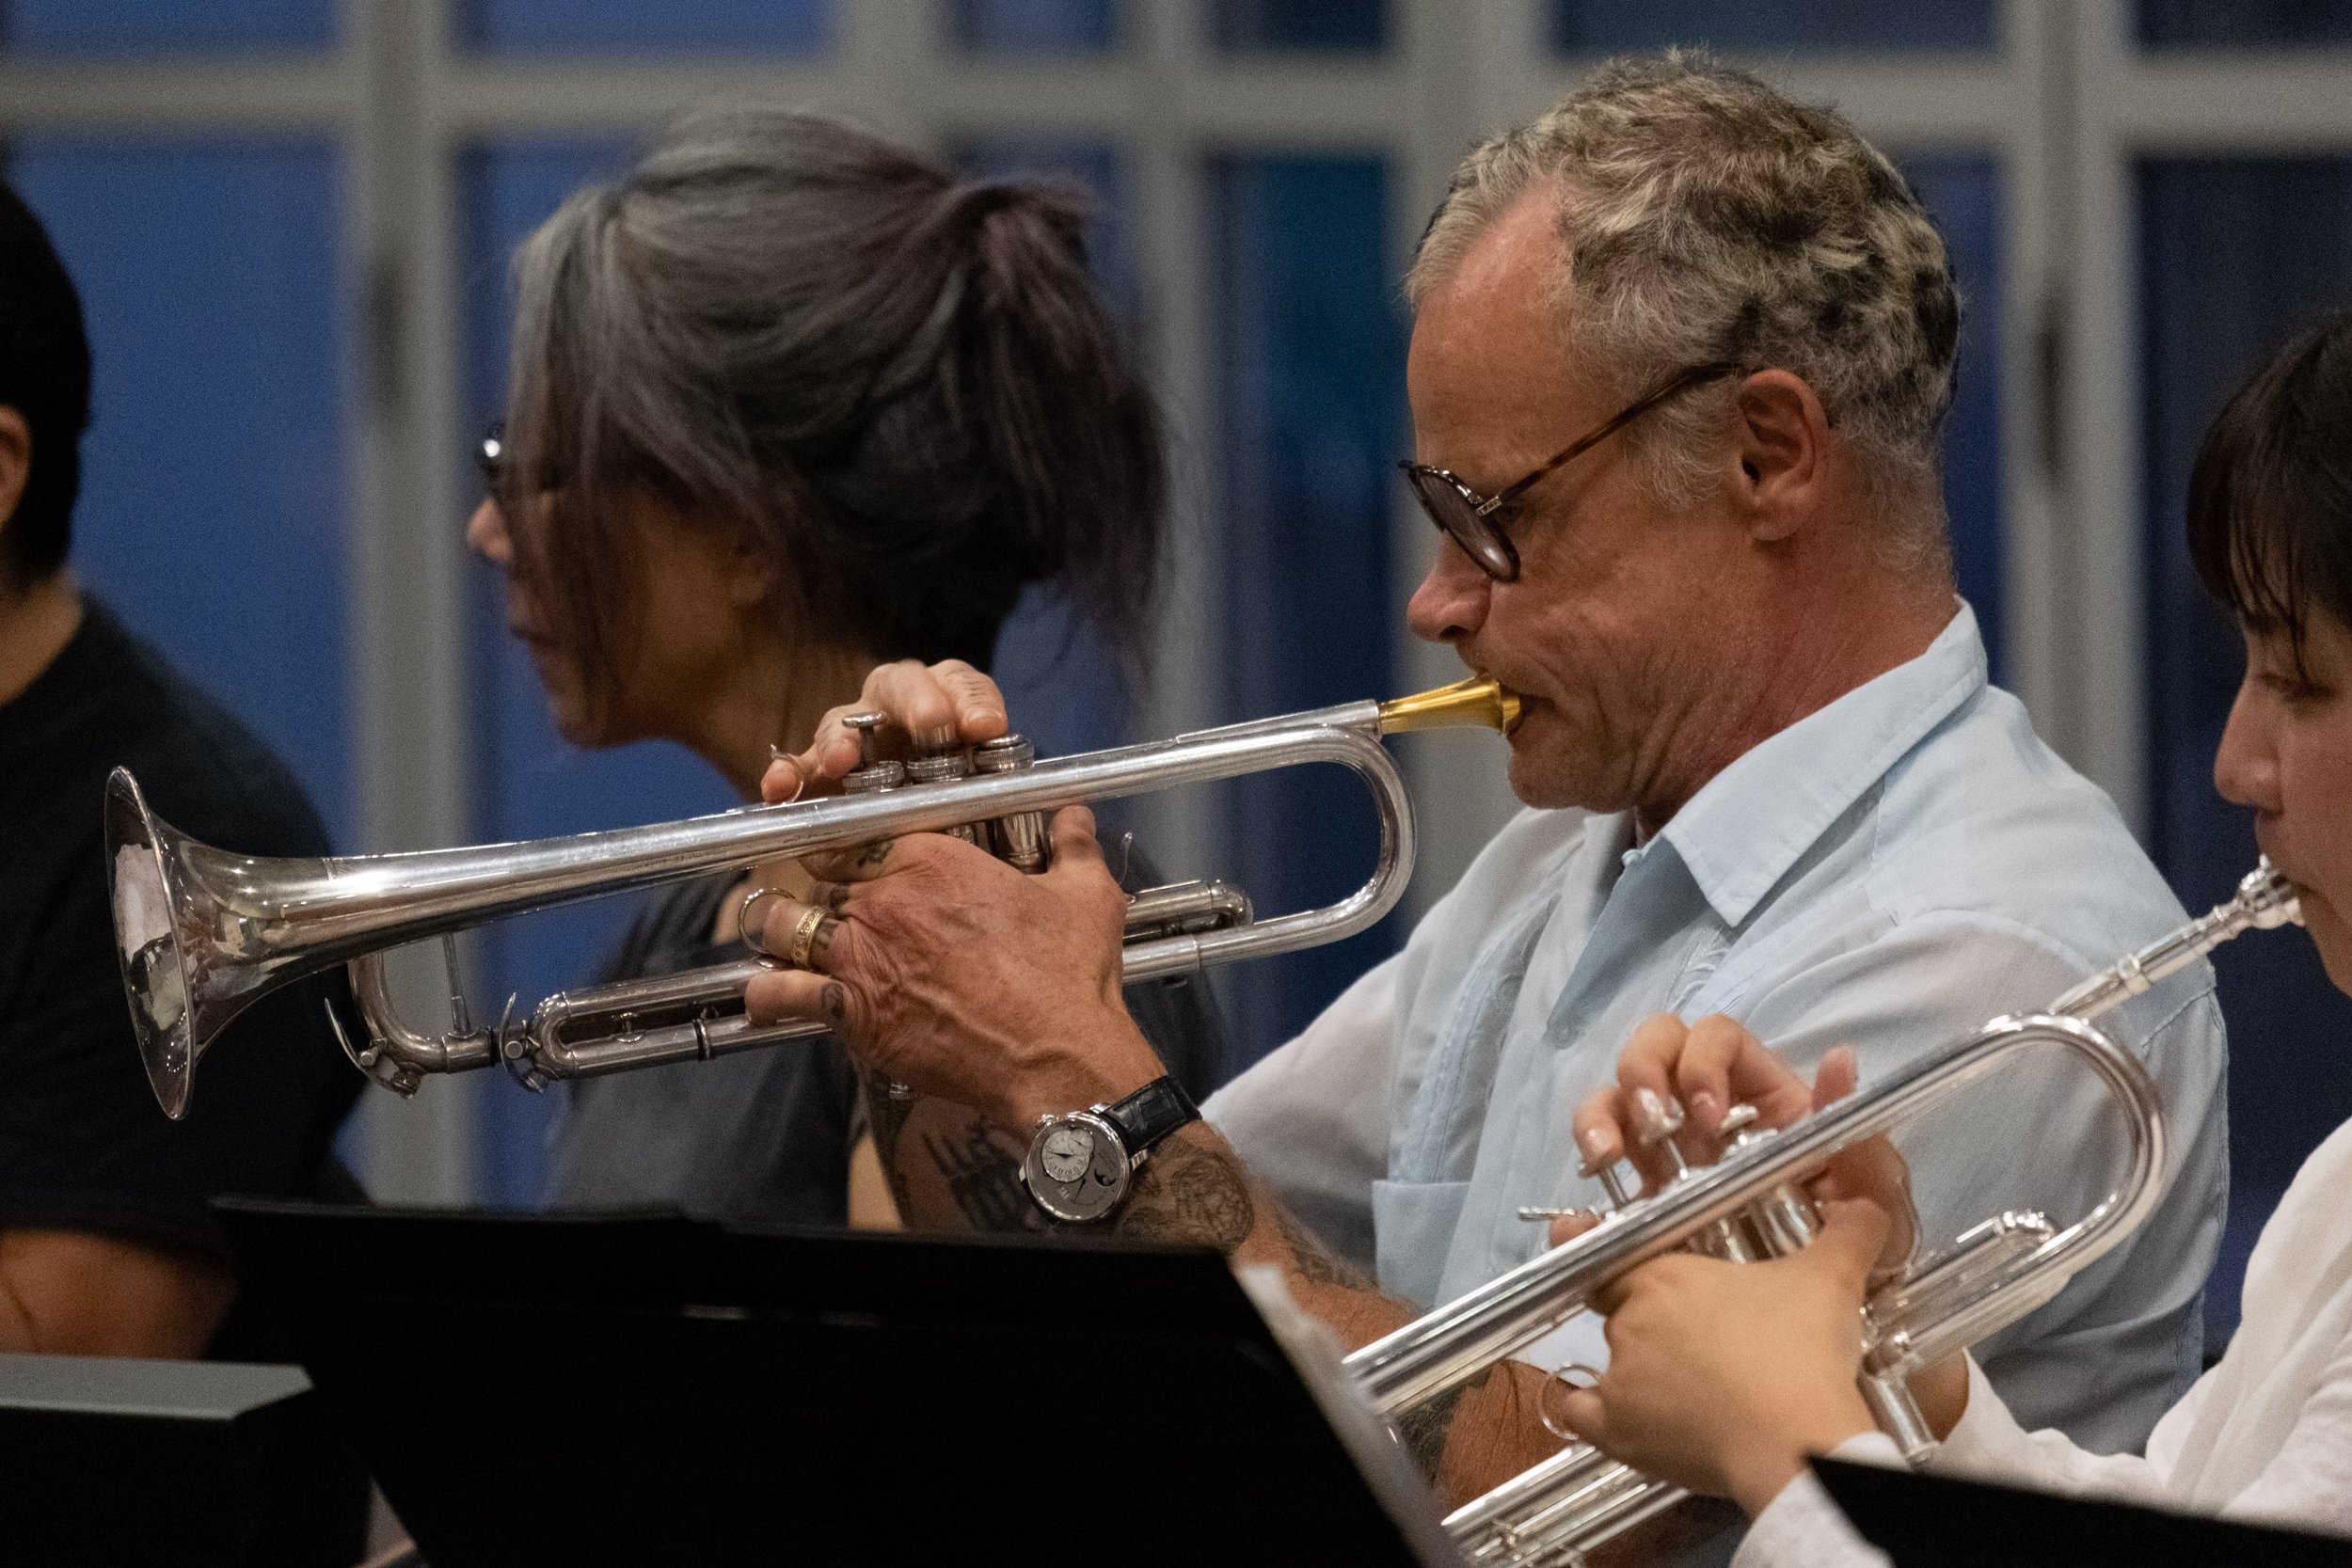  The musician profesionally known as Flea, founding member of the Red Hot Chili Peppers, playing trumpet with the Santa Monica (SMC) Jazz Ensemble during rehearsal on Monday, Sept. 18th, 2023 at the SMC Performing Arts Complex in Santa Monica, Calif.